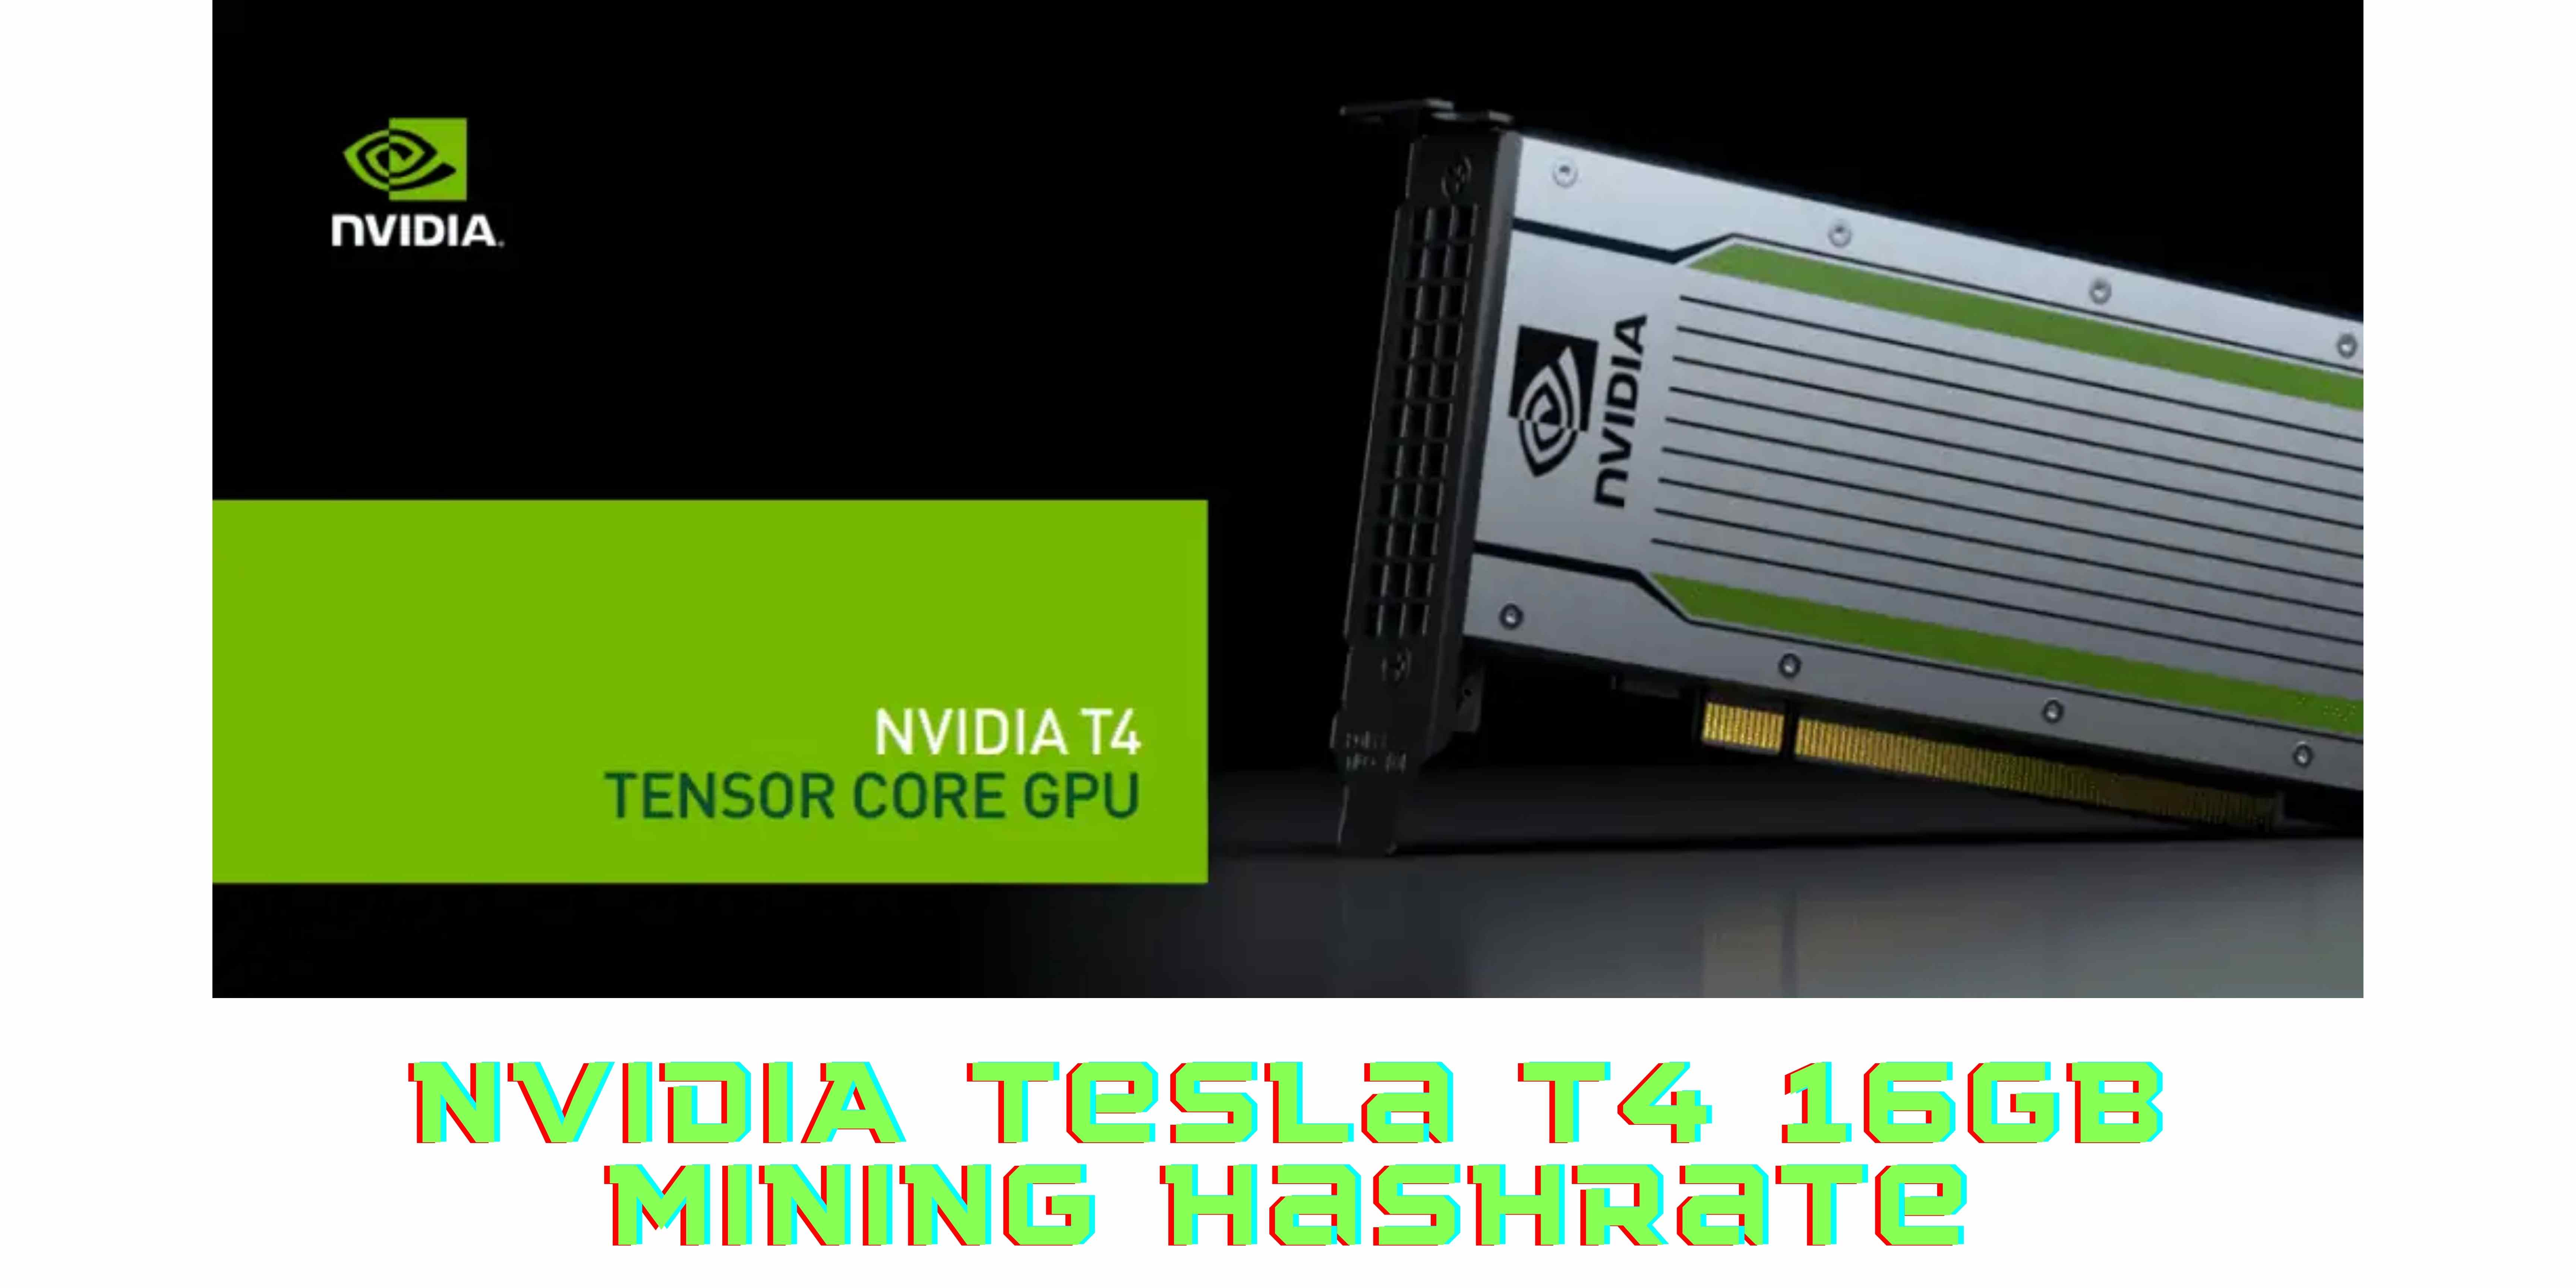 Is It Possible To Mine With The NVIDIA Tesla T4 16GB Mining Hashrate?